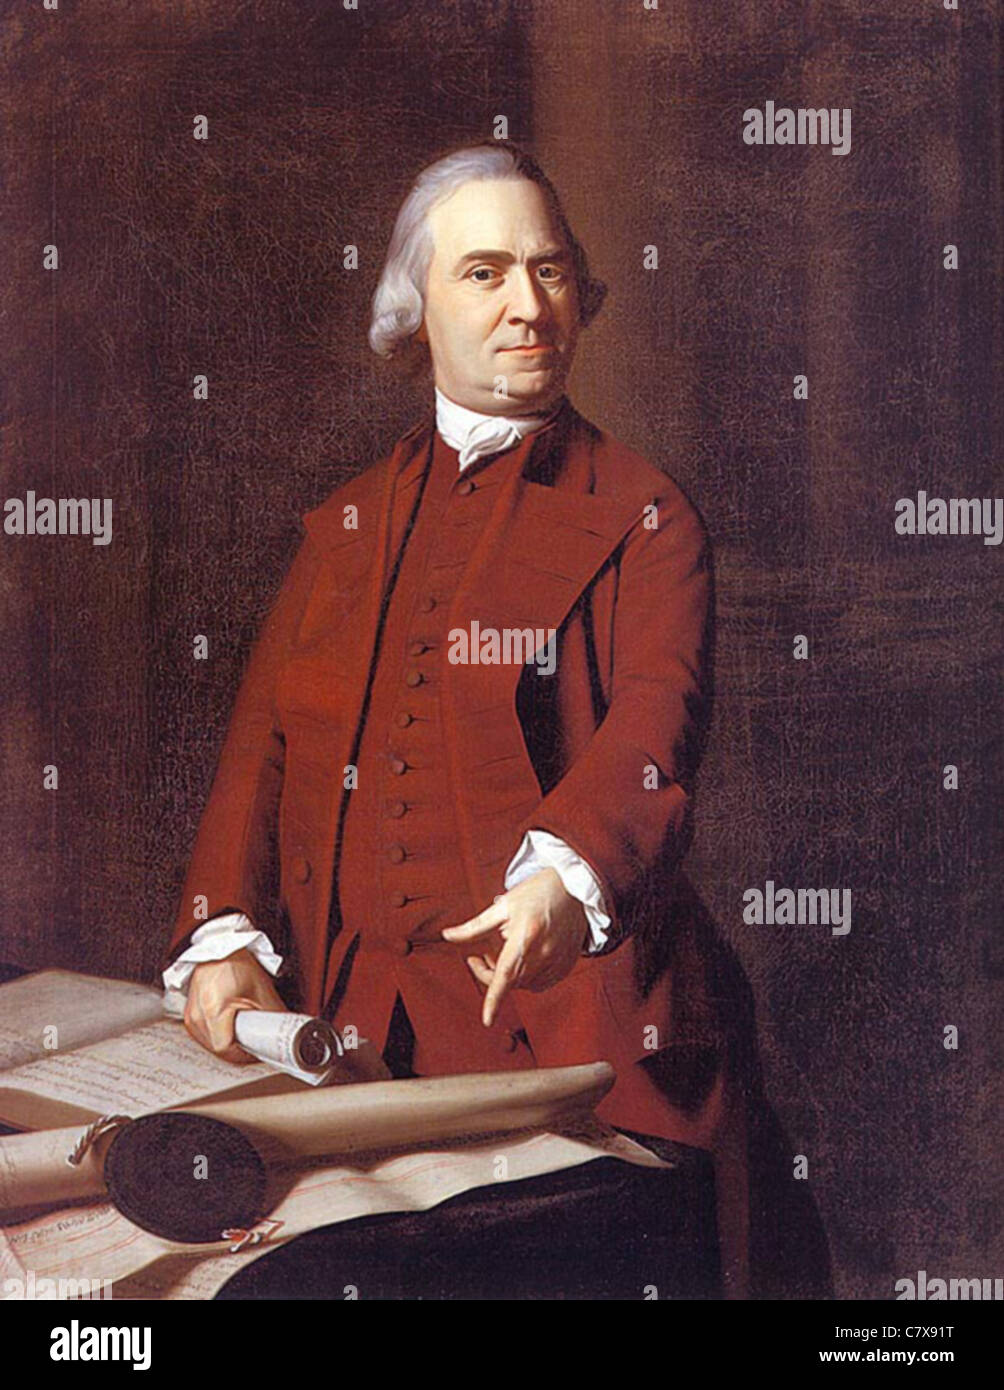 SAMUEL ADAMS (1722-1803) one of the founding fathers of the USA in portrait by John Copley about 1773 - see Description below Stock Photo